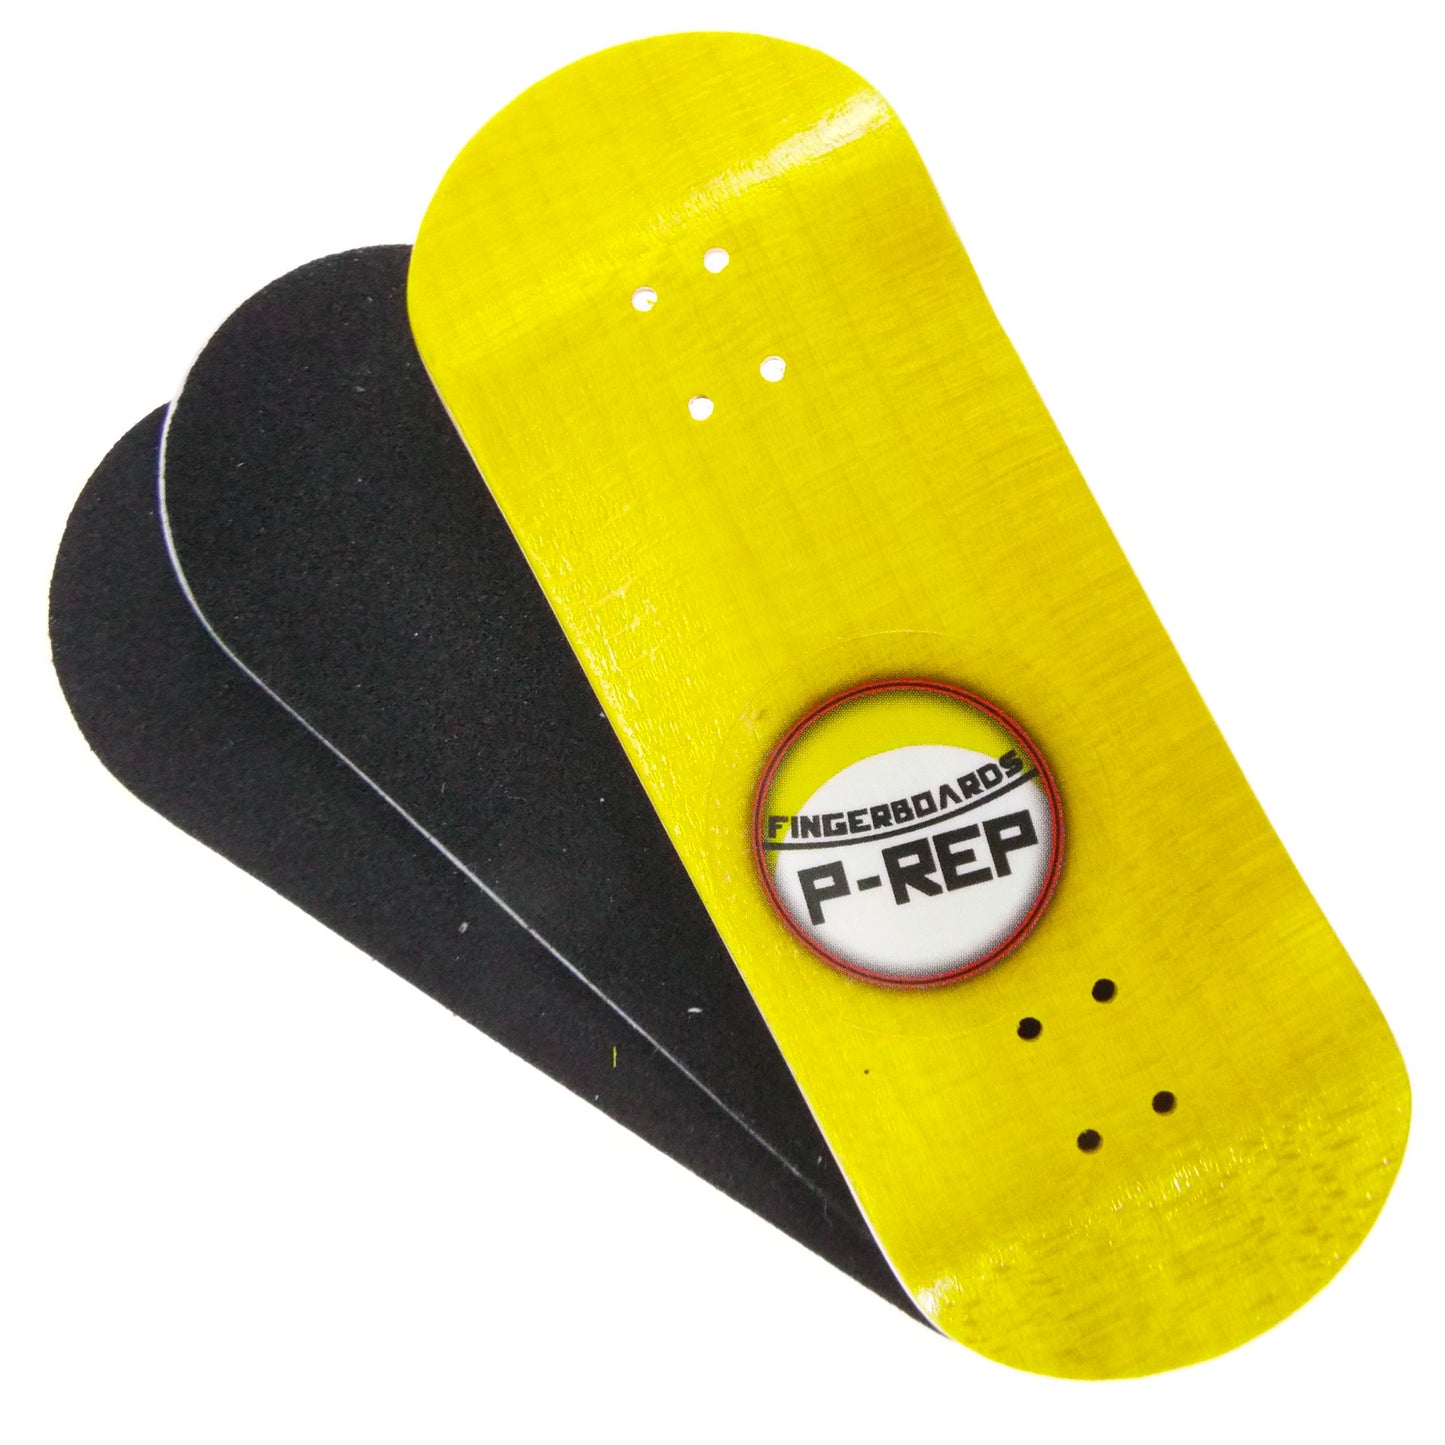 P-REP  34mm x 97mm V2 Standard Complete - Yellow